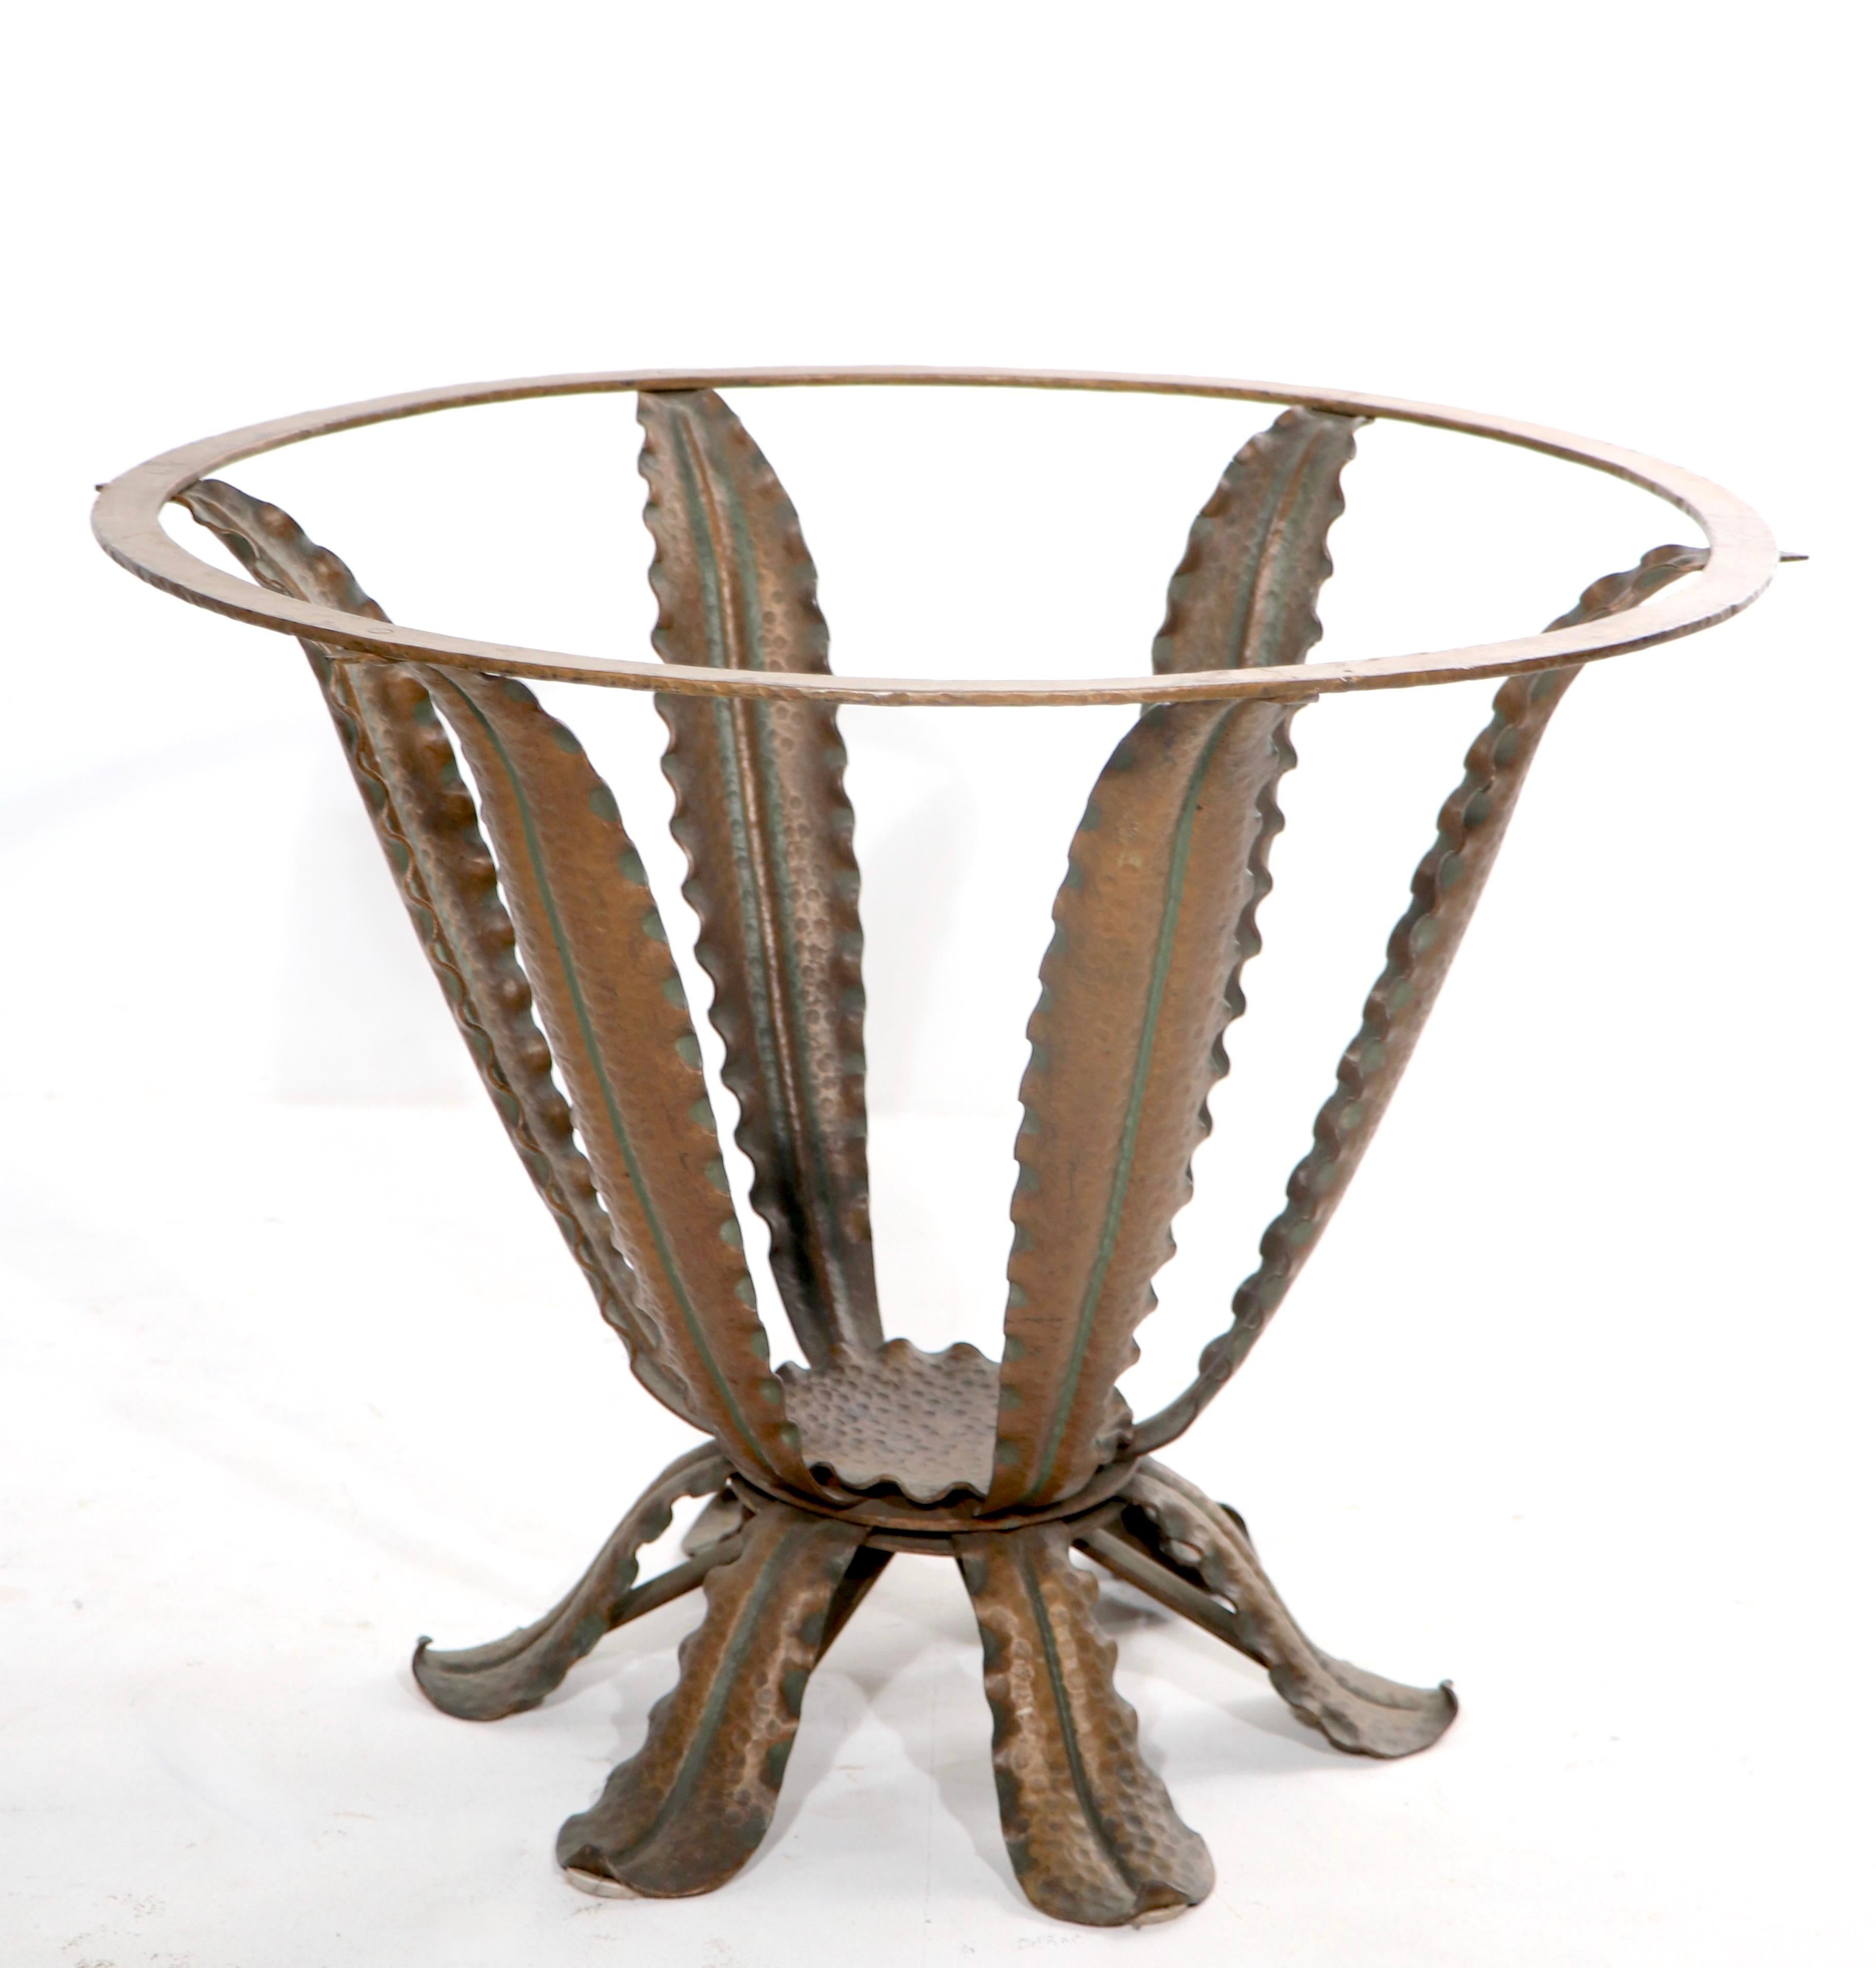 Rare Cactus table ( base ) by Pierluigi Colli, made in Torino, Italy circa 1930's. The base is in excellent original condition, originally sold with round glass top, no longer present. The base is on hammered wrought iron in the form of a cactus